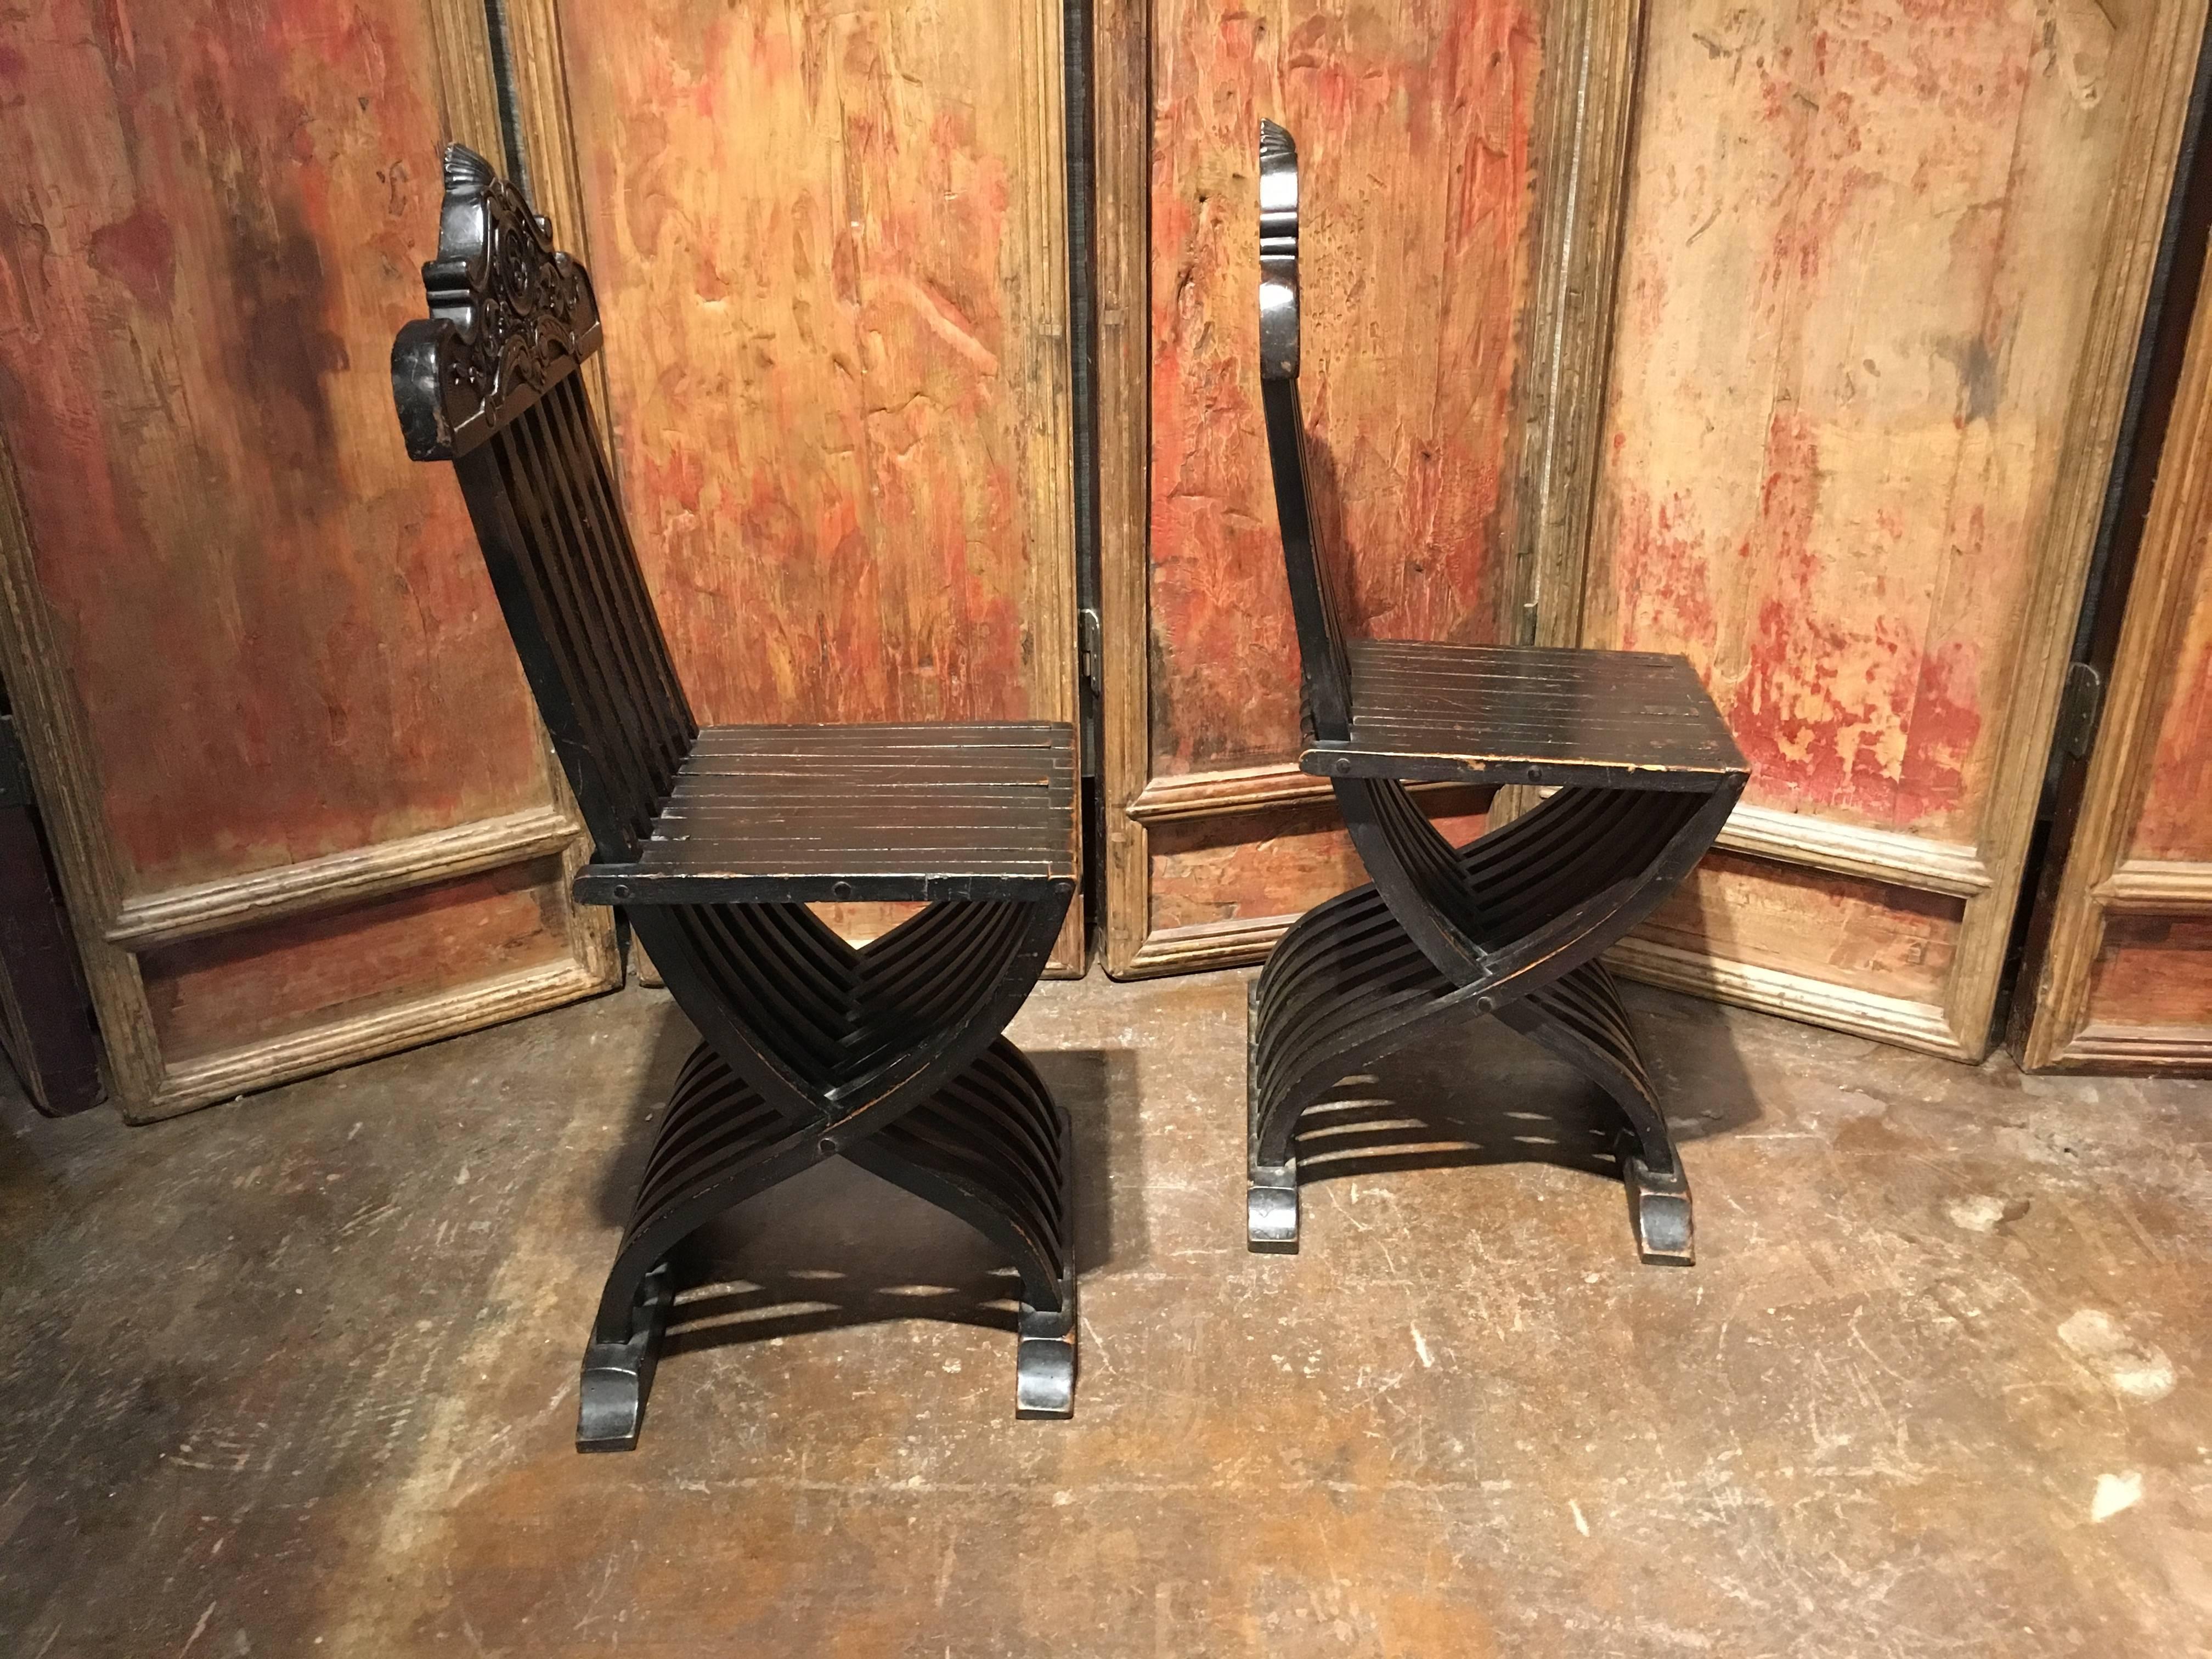 A handsome pair of 19th century Italian ebonized wood chairs. The chairs of alluring shape, with slatted legs and back. The legs of a curvaceous 